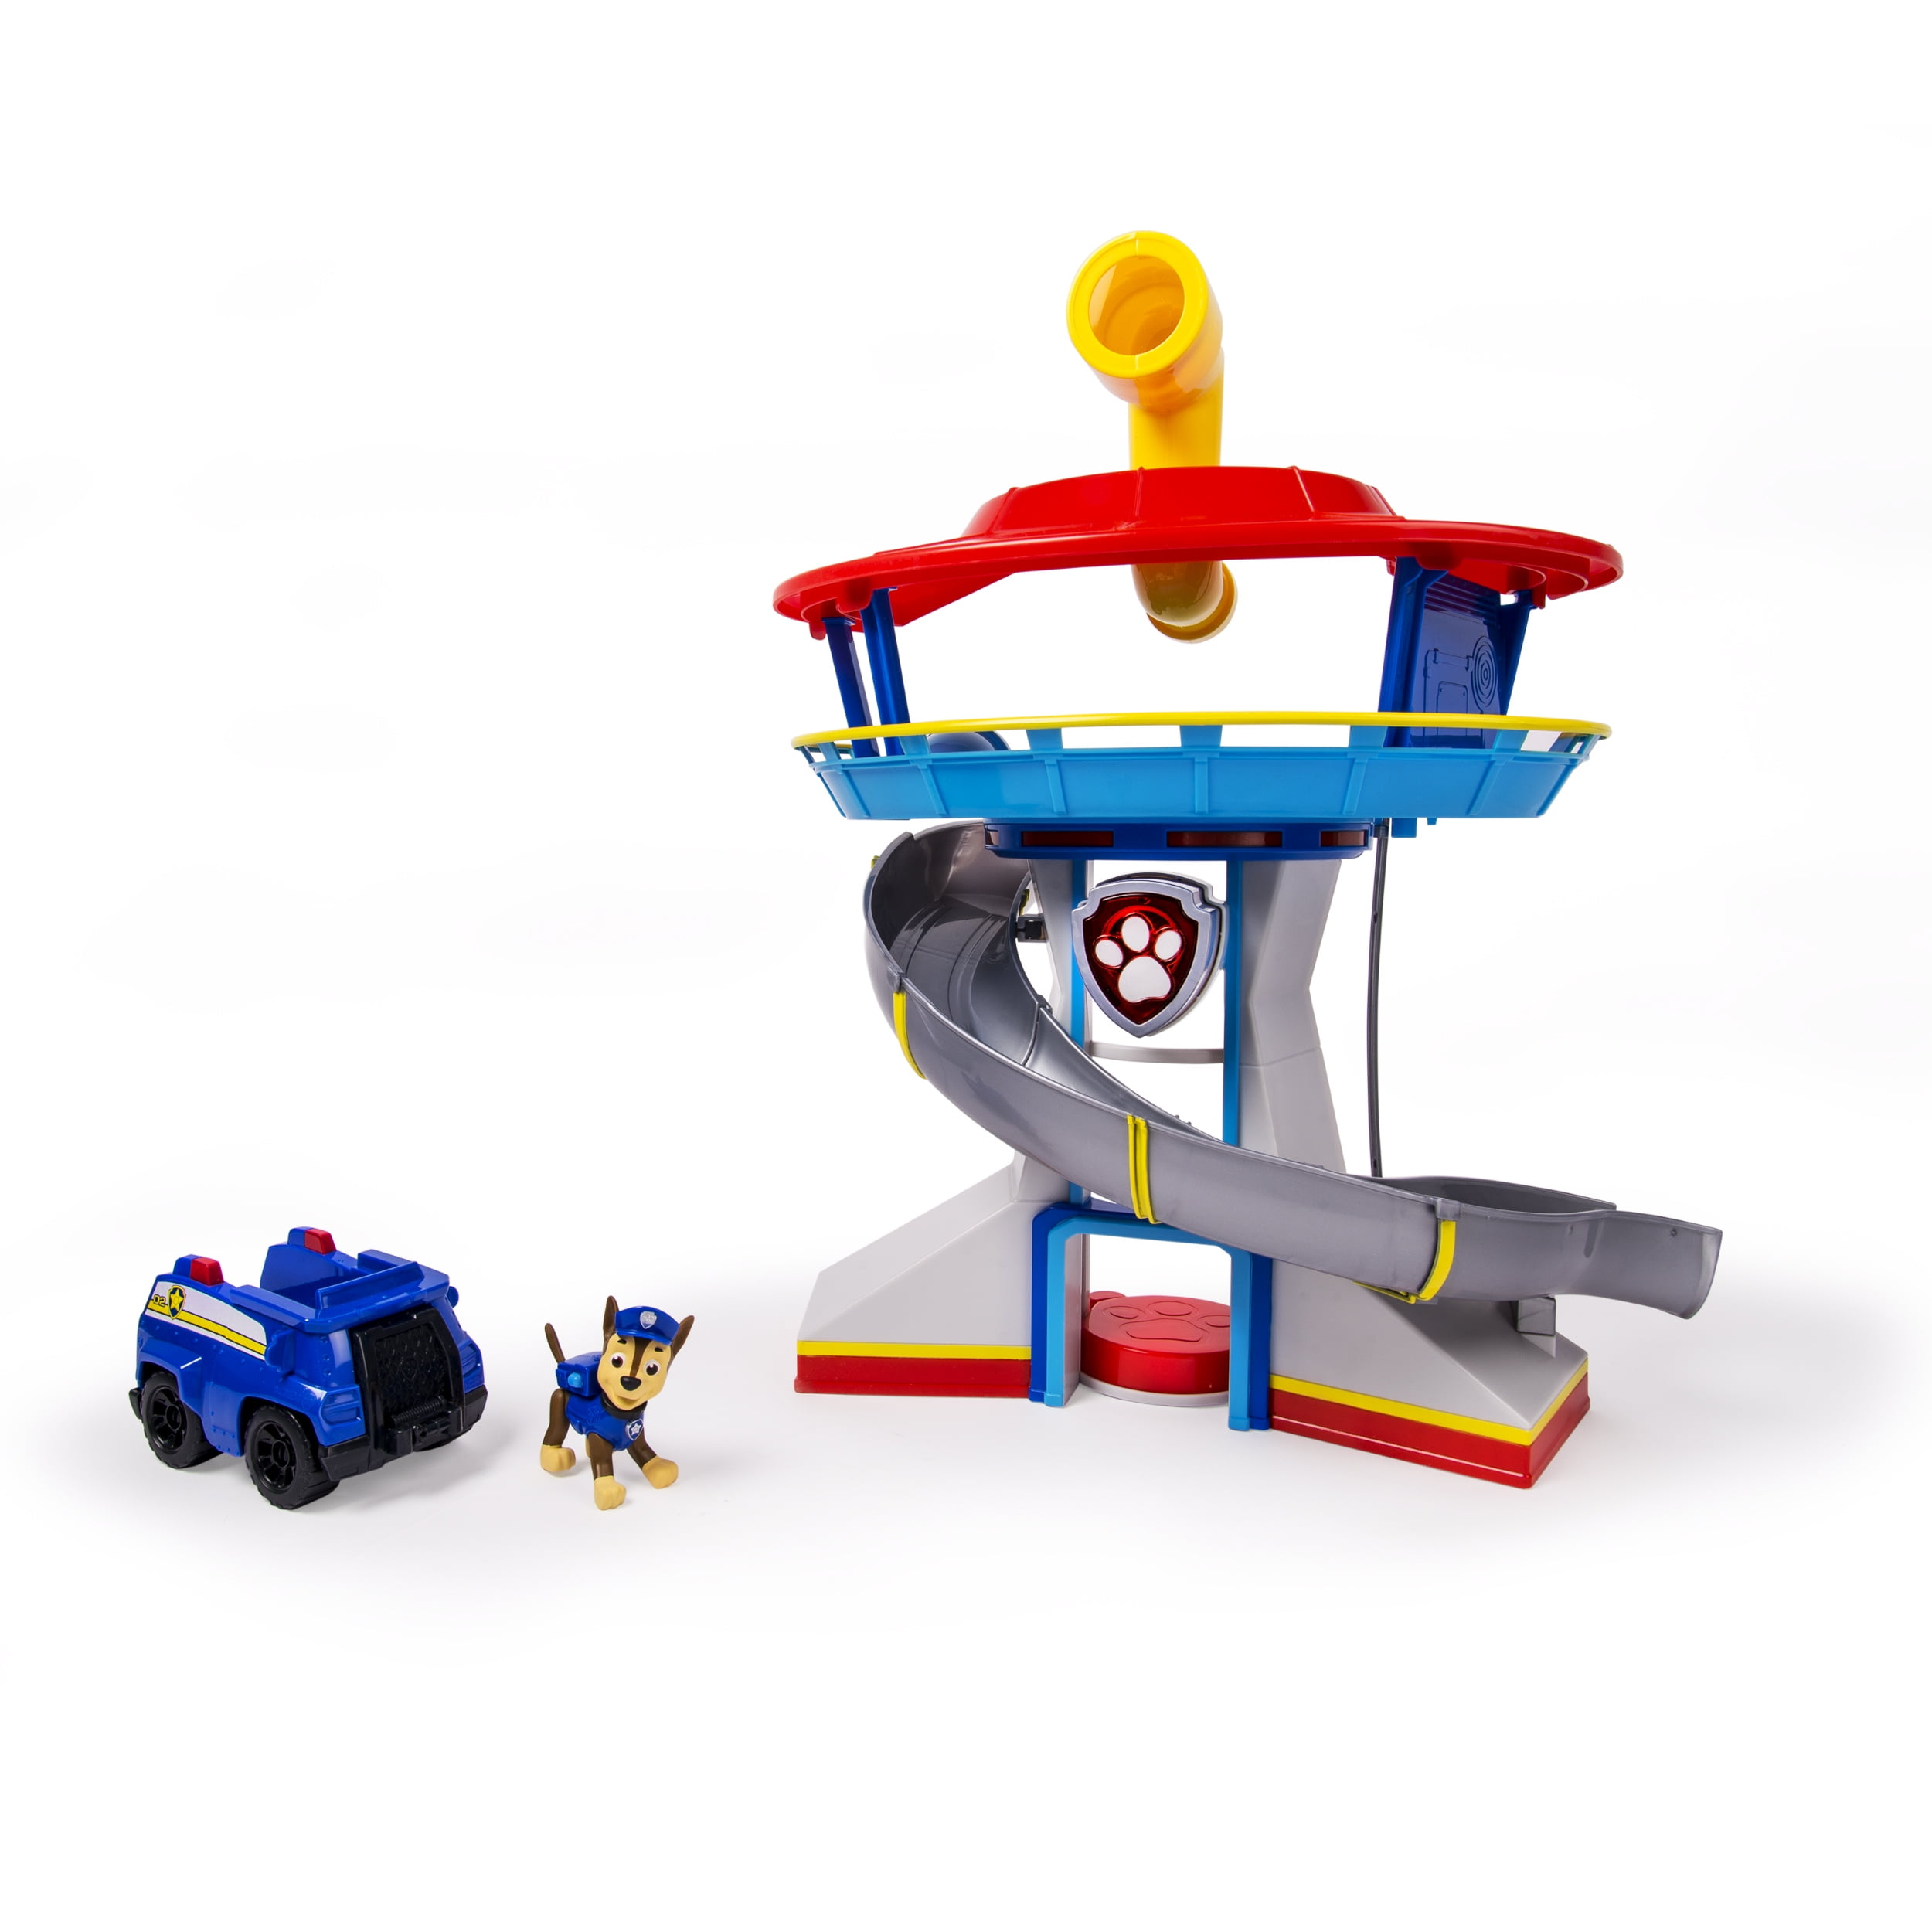 Paw Patrol Look-out Playset, Vehicle 